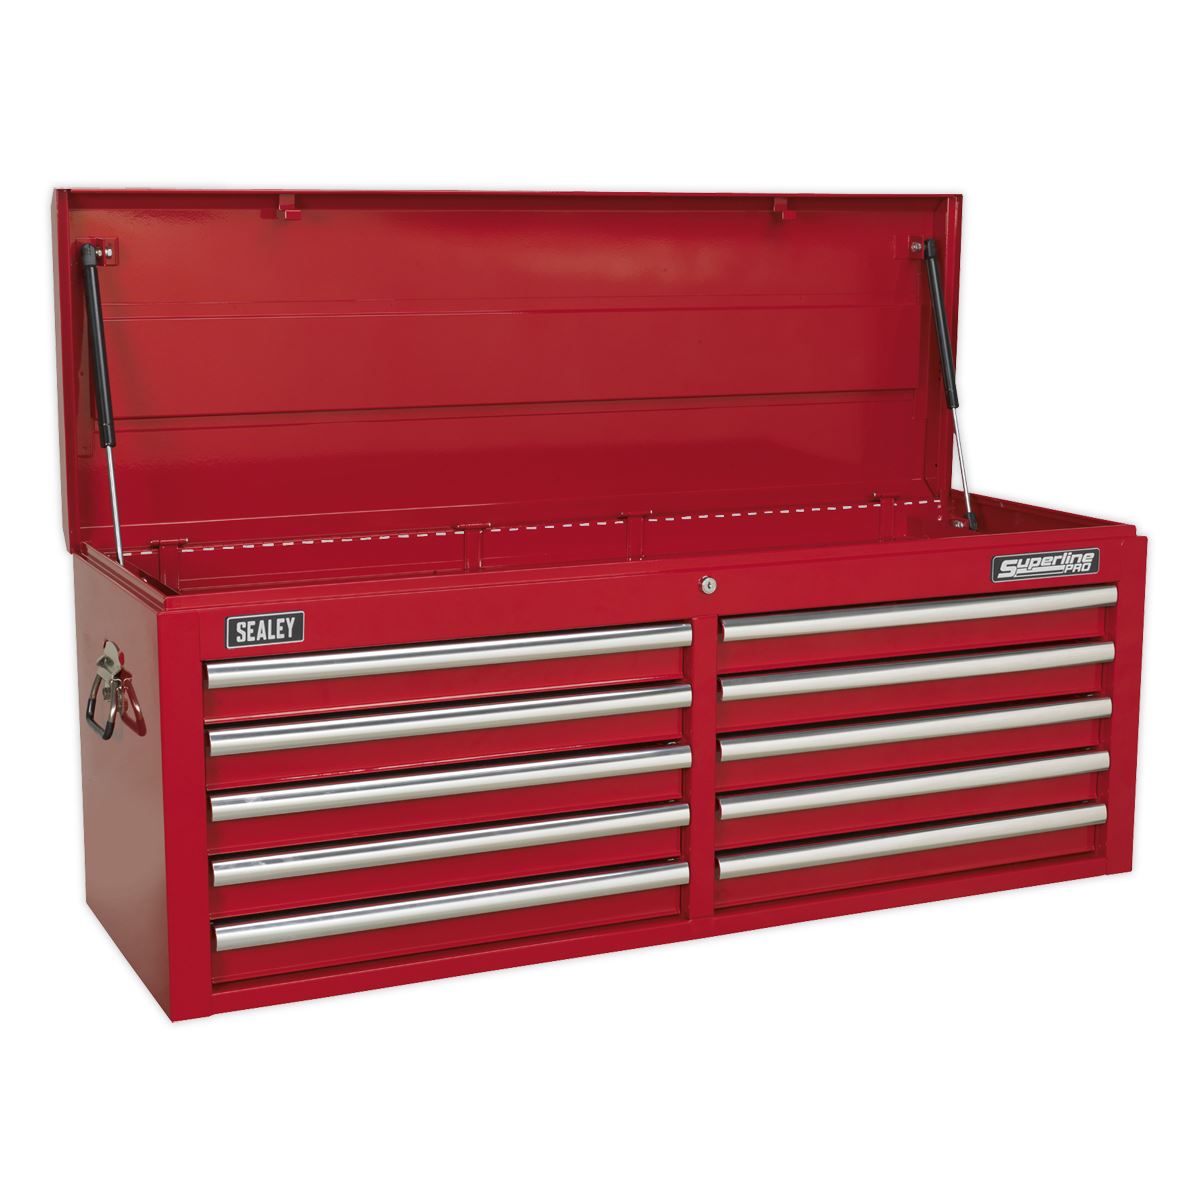 Sealey Topchest 10 Drawer with Ball Bearing Slides - Red AP5210T